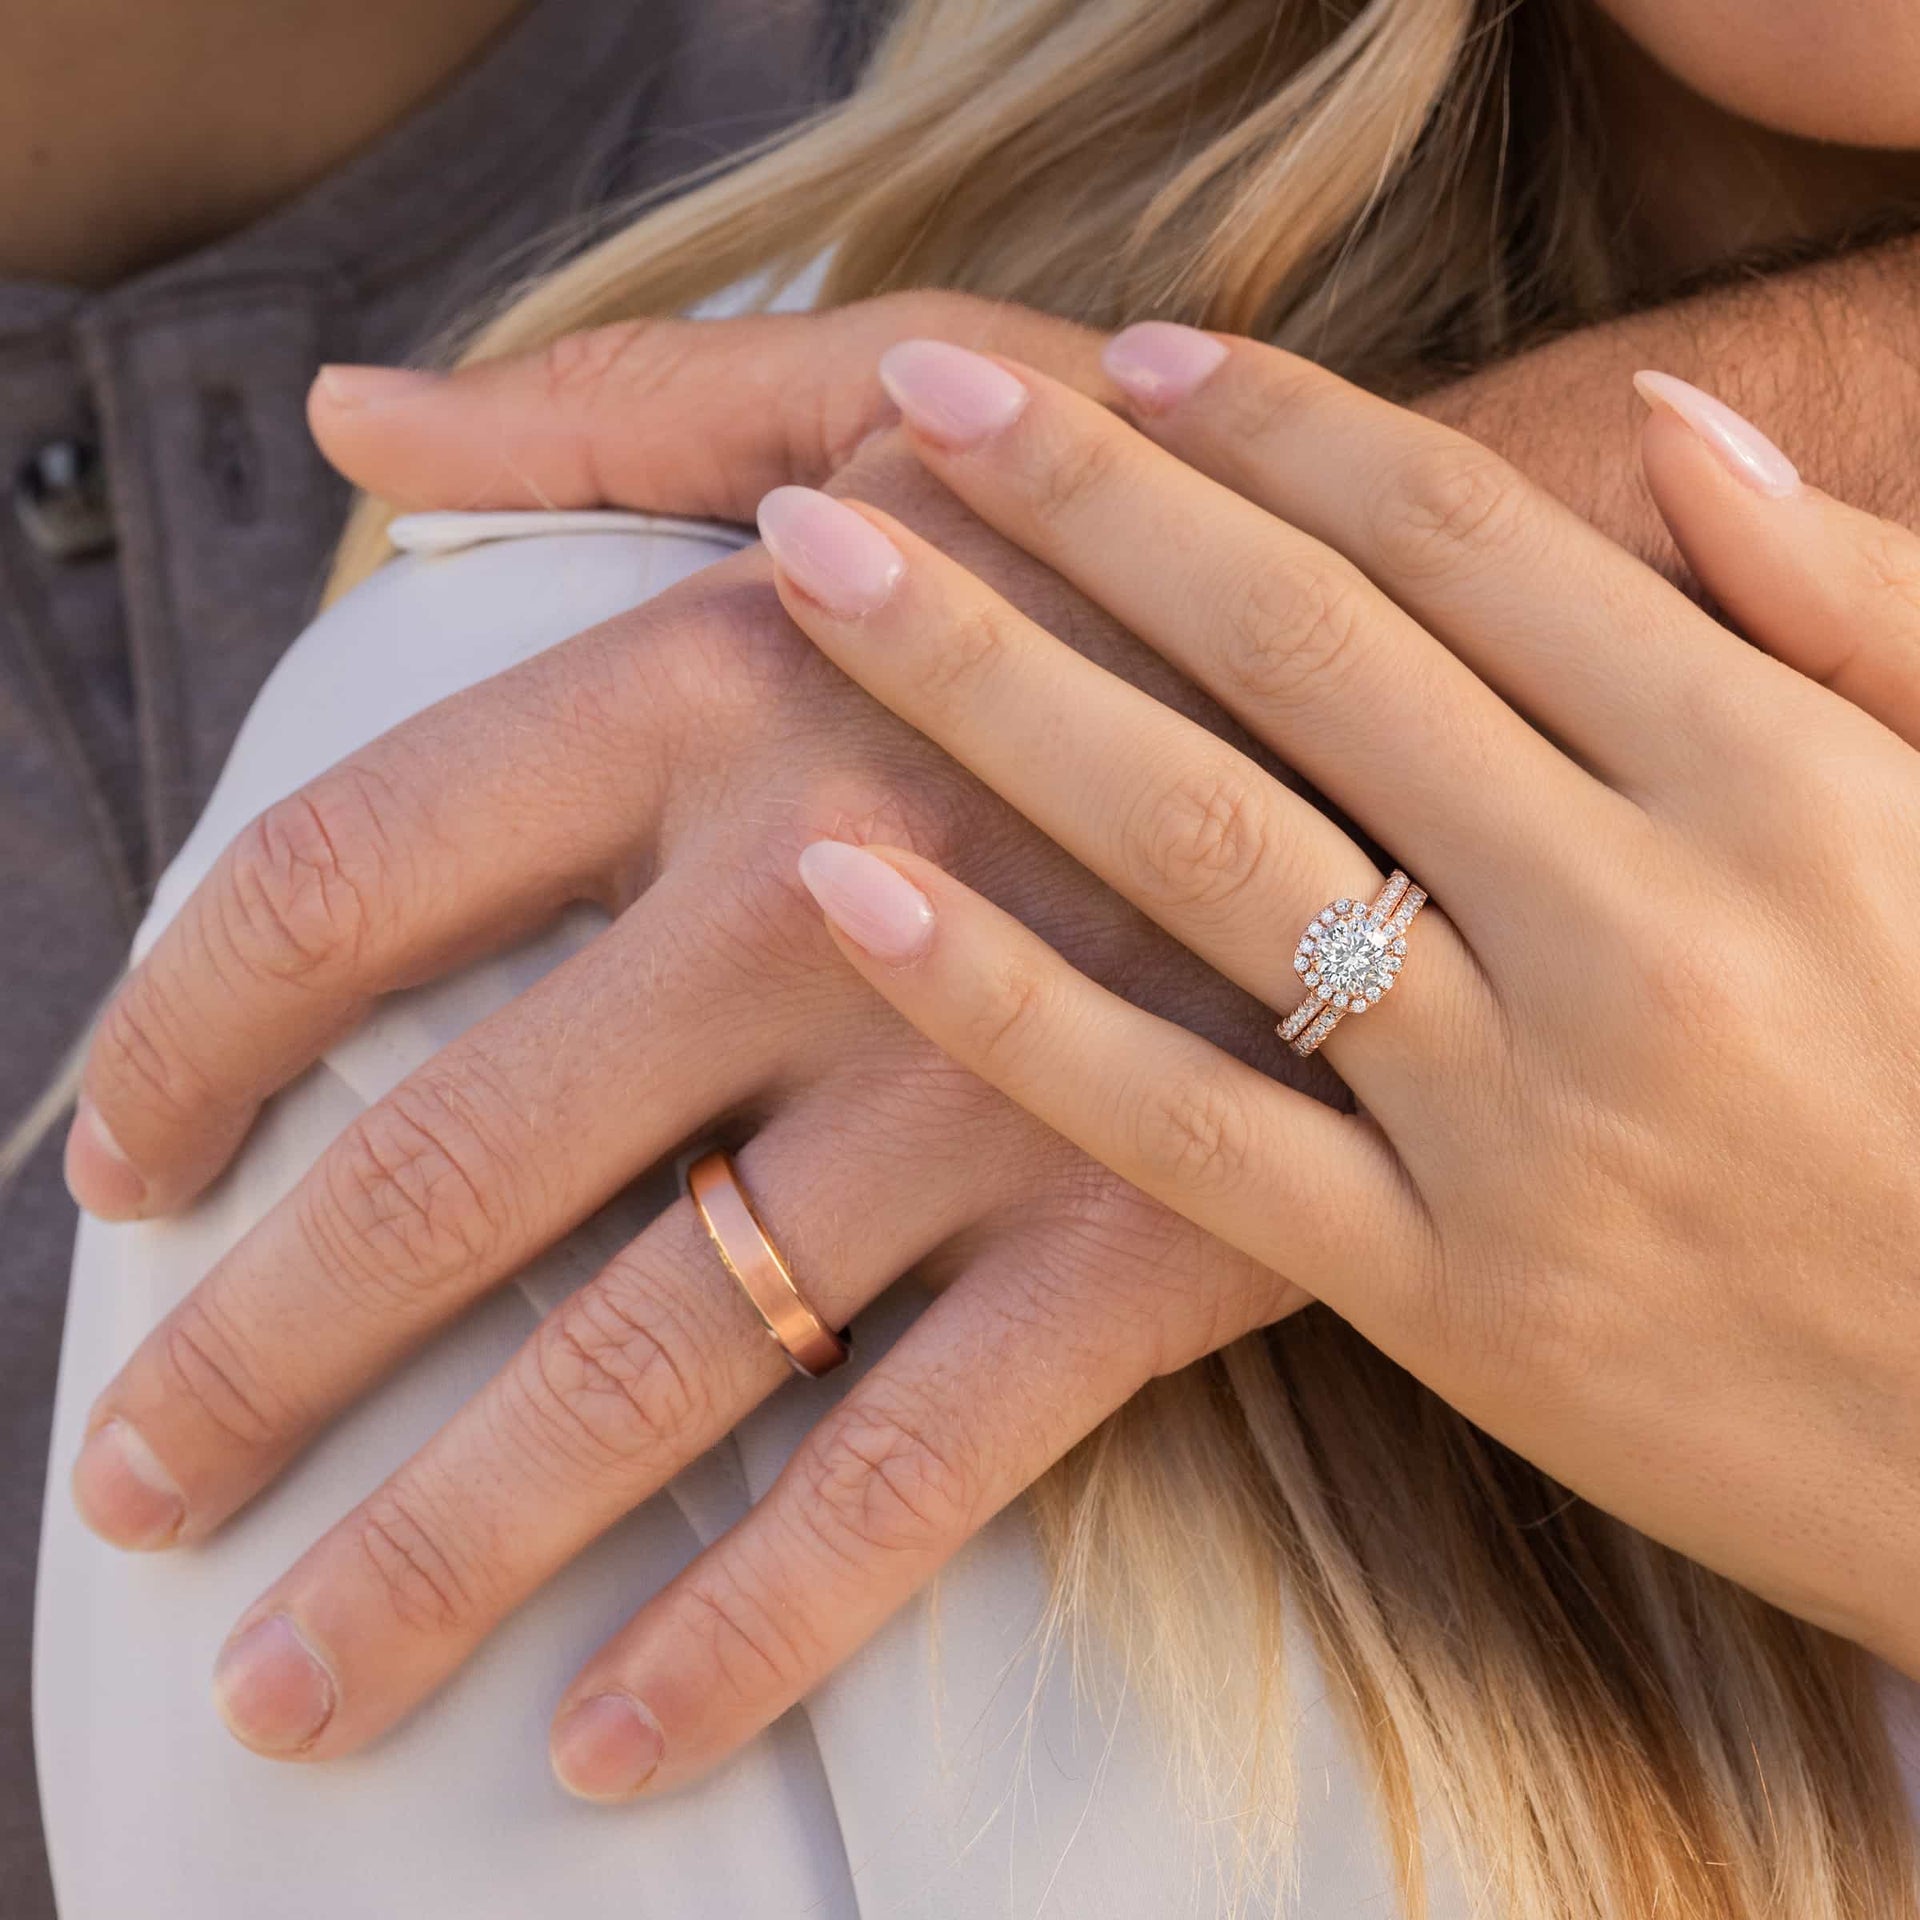 couple wearing rose gold wedding rings while holding hands